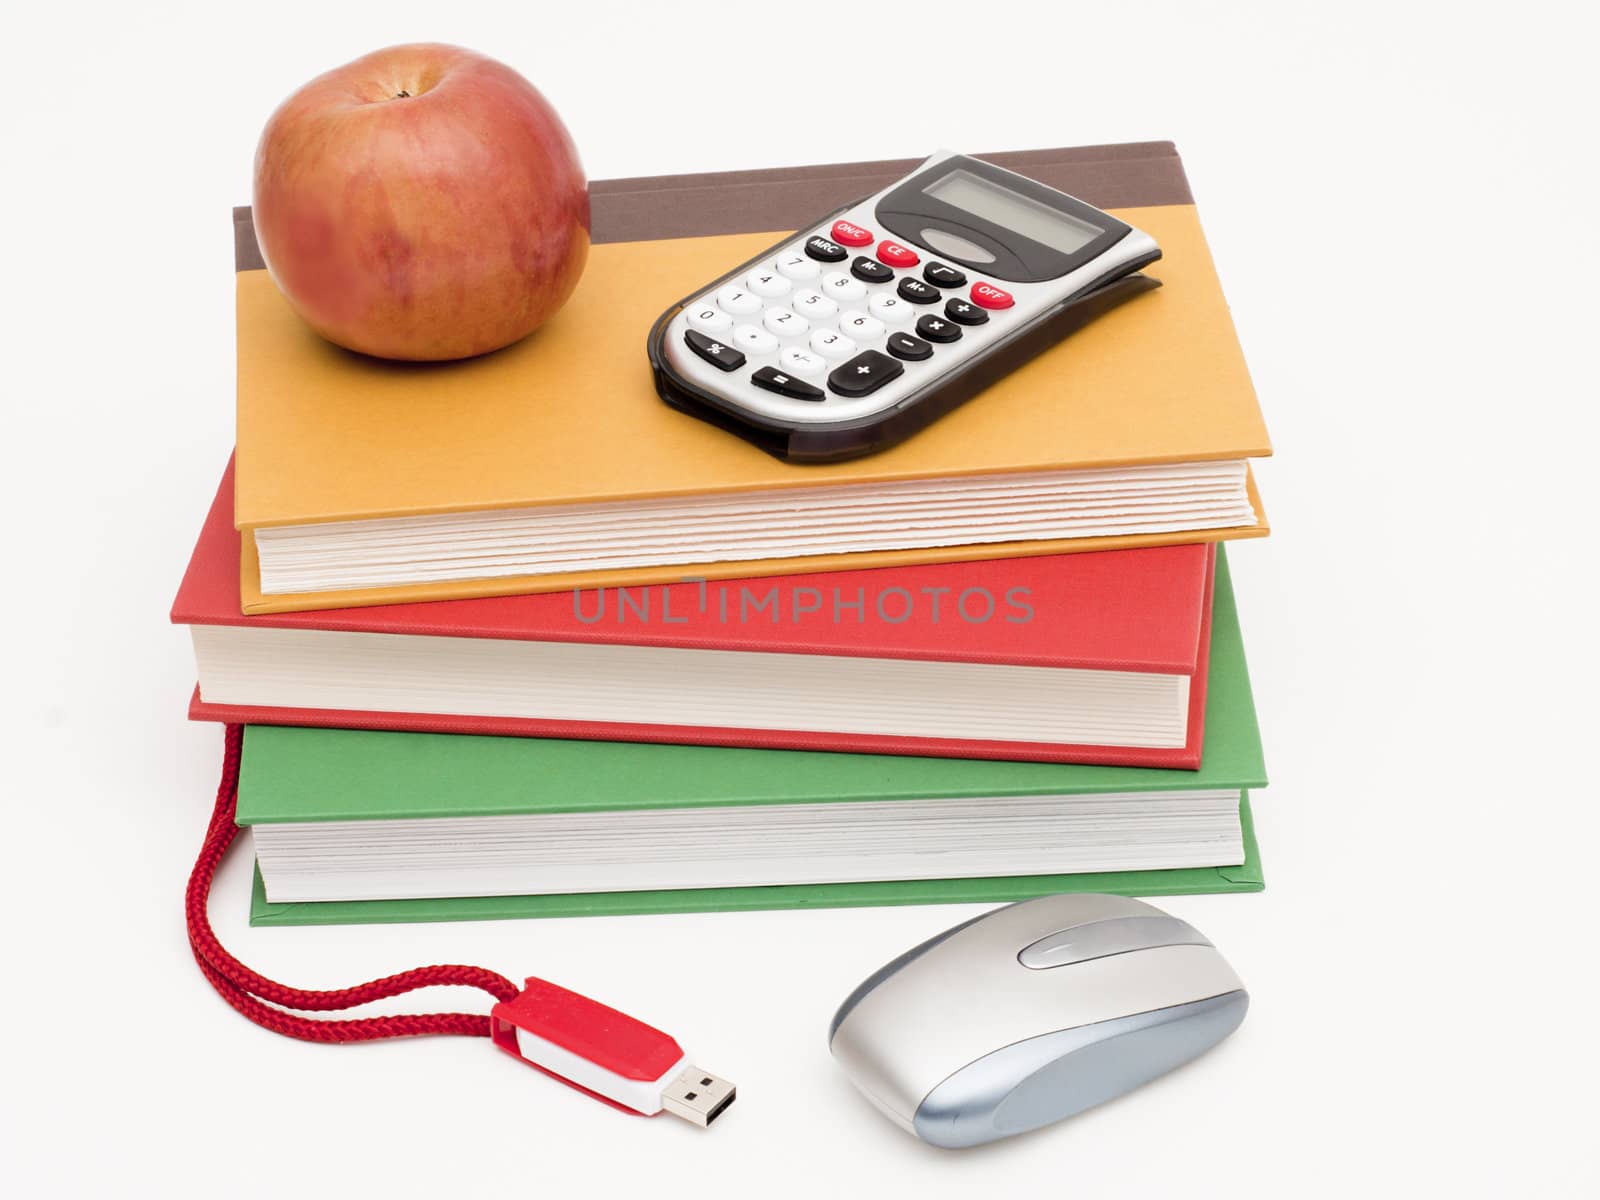 Back-to-school collection of hardback textbooks, calculator, thumb drive and mouse with an apple for the teacher on top. Isolated on white.